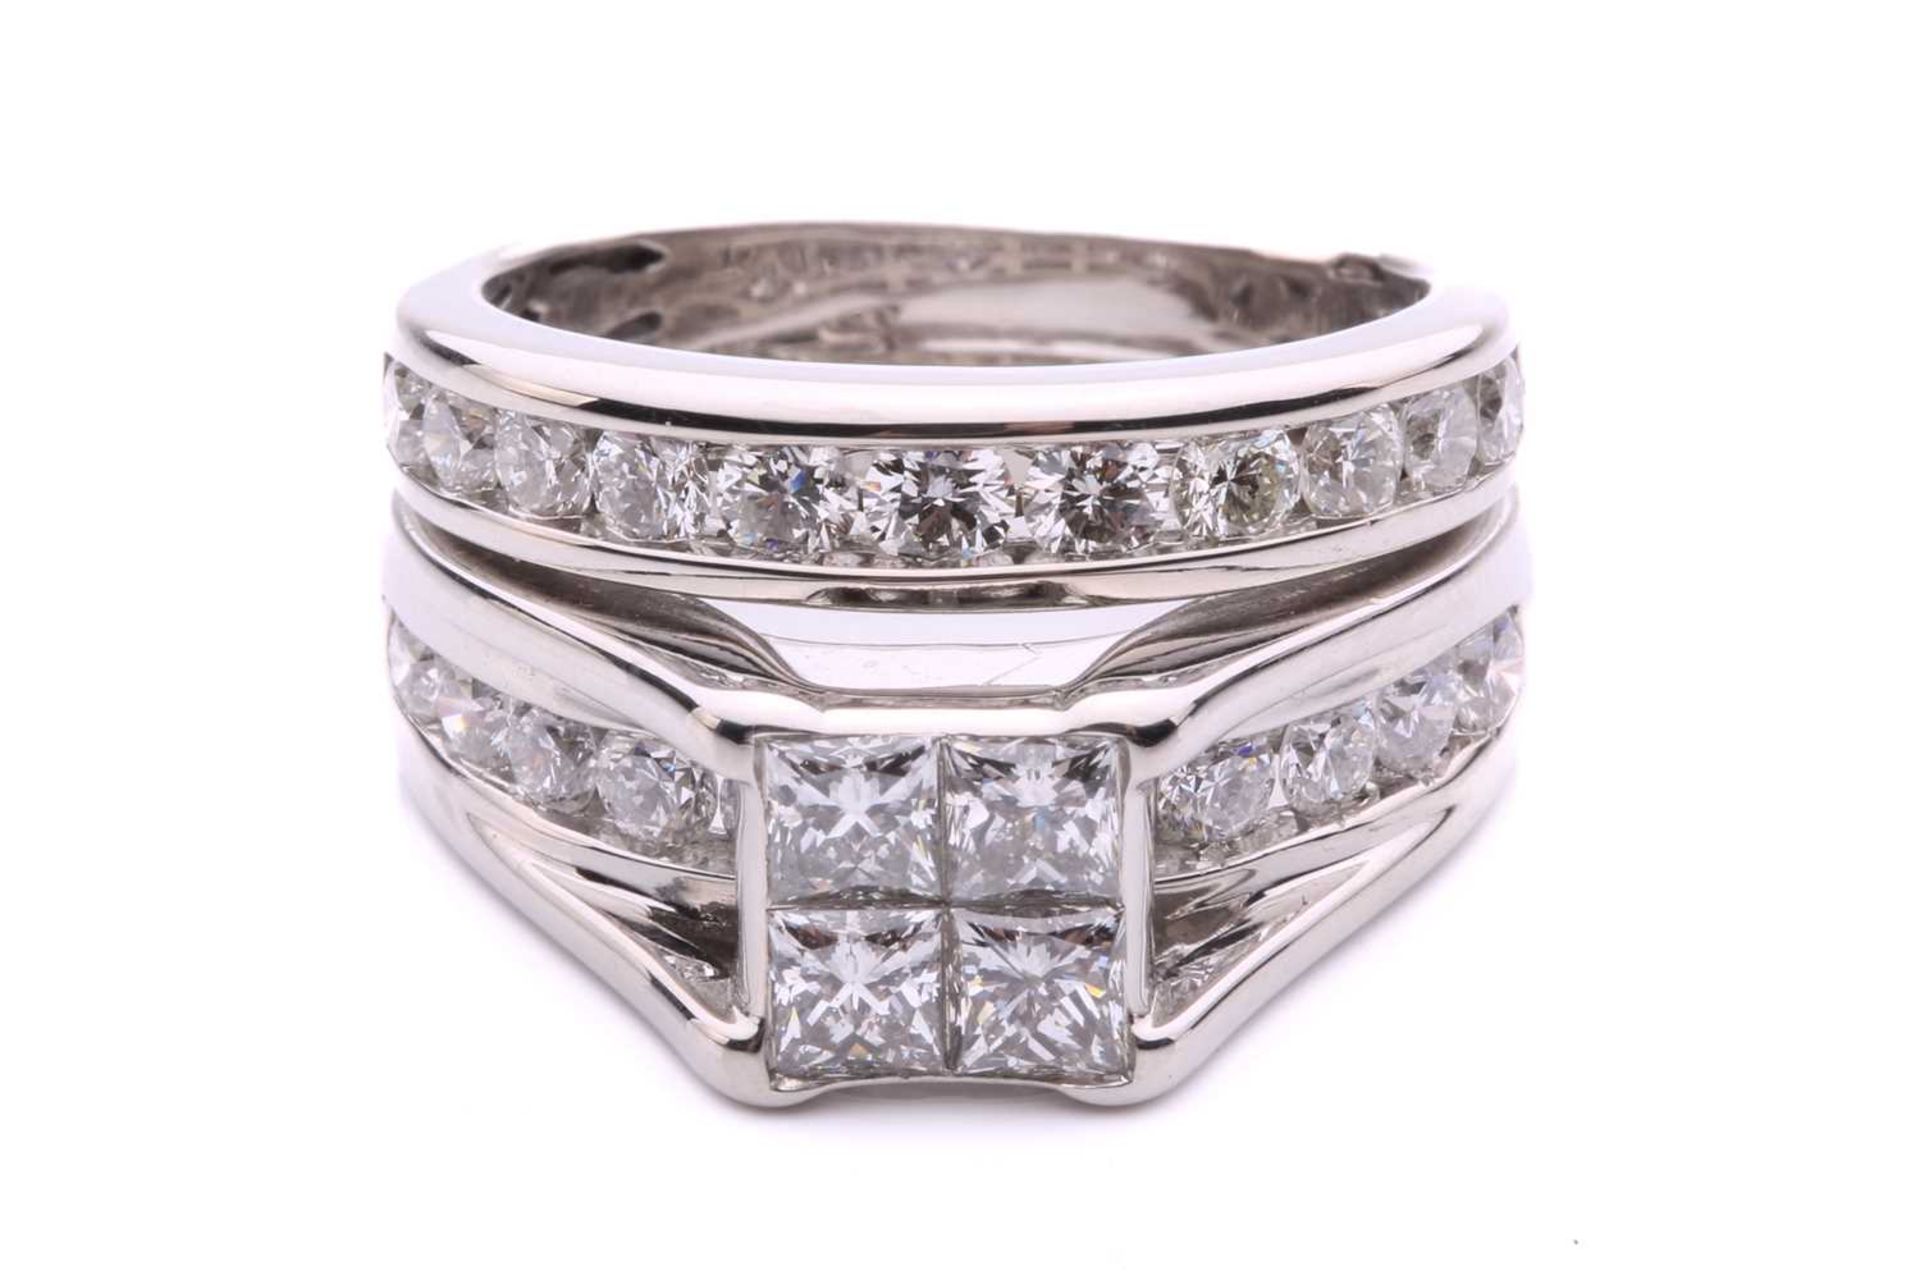 A diamond set bridal set rings, with 4 illusion set princess cut diamonds with an under hoop channel